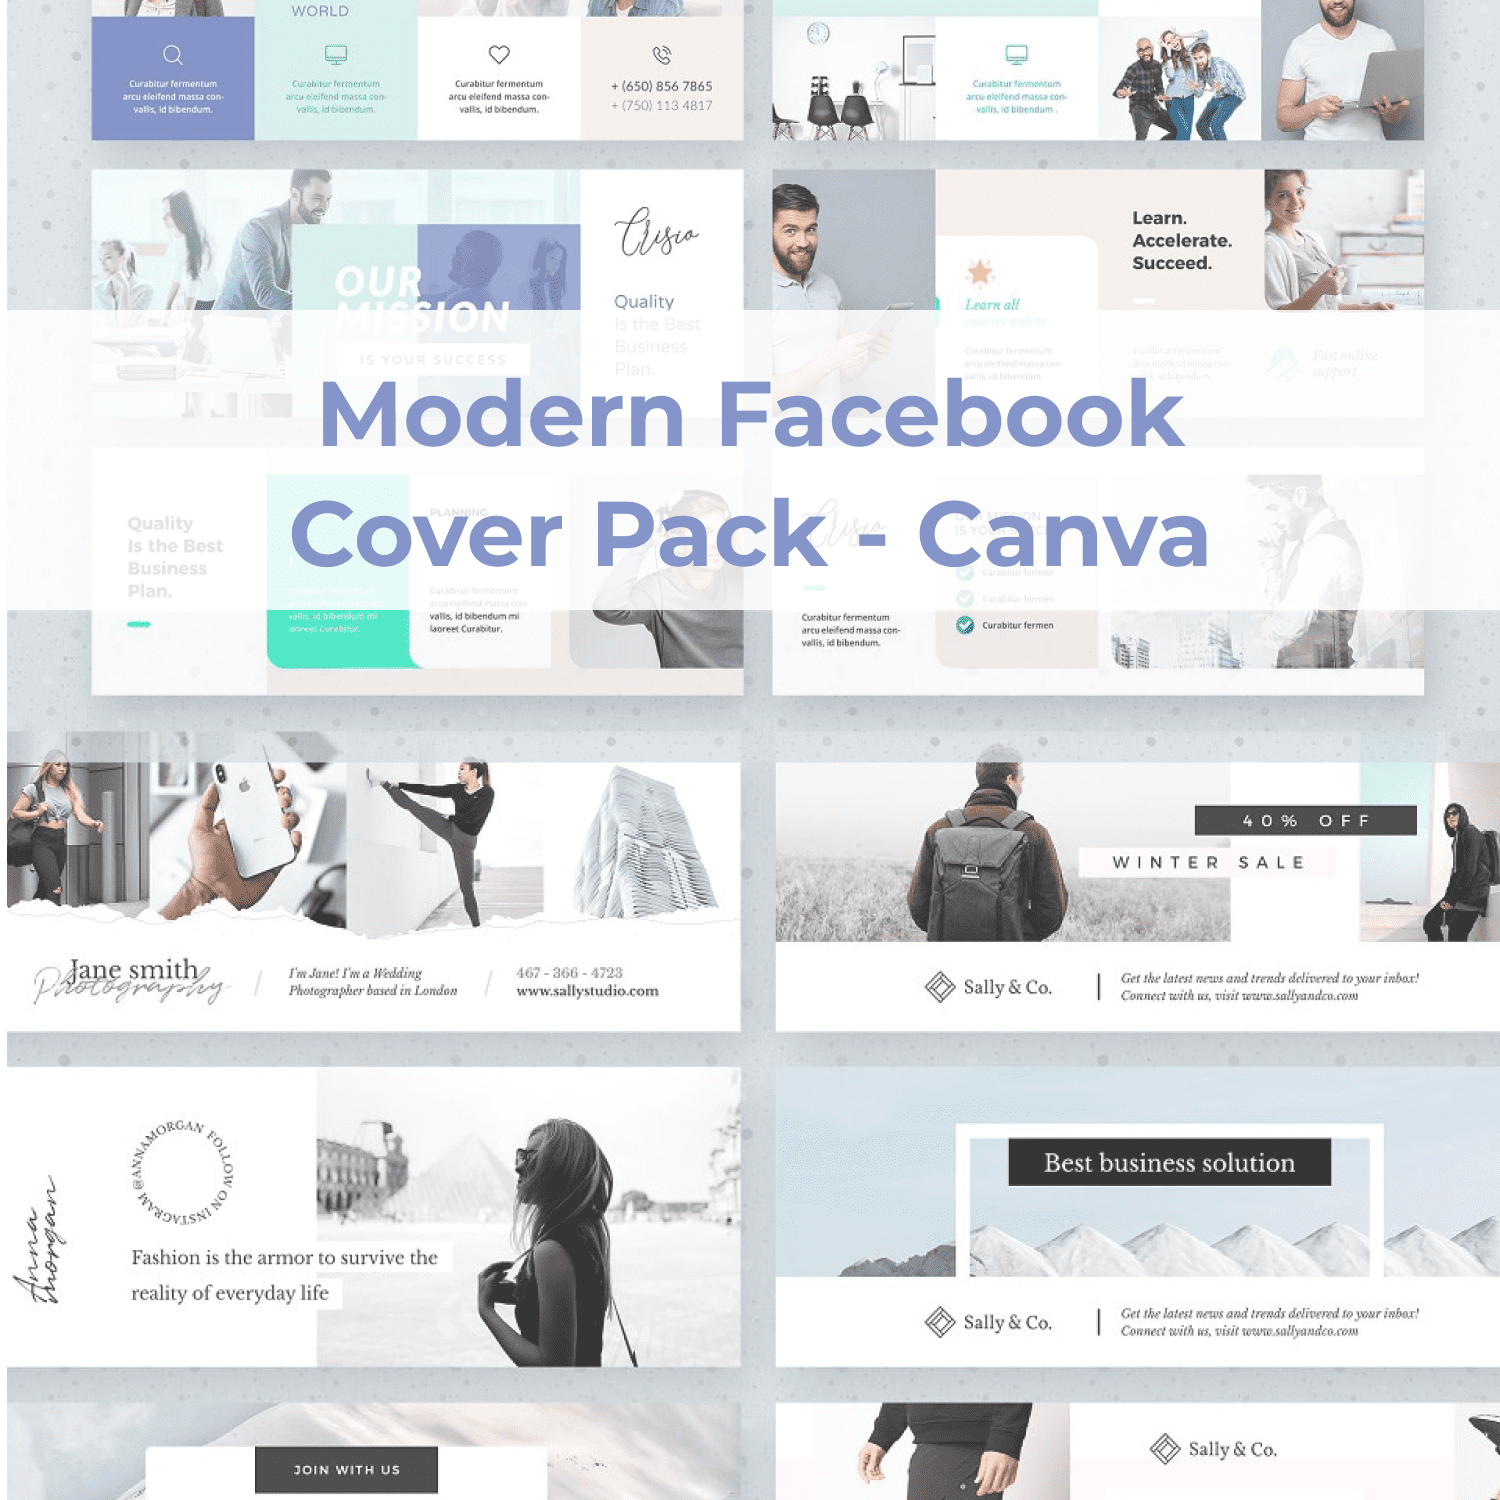 Modern Facebook Cover Pack - Canva cover image.